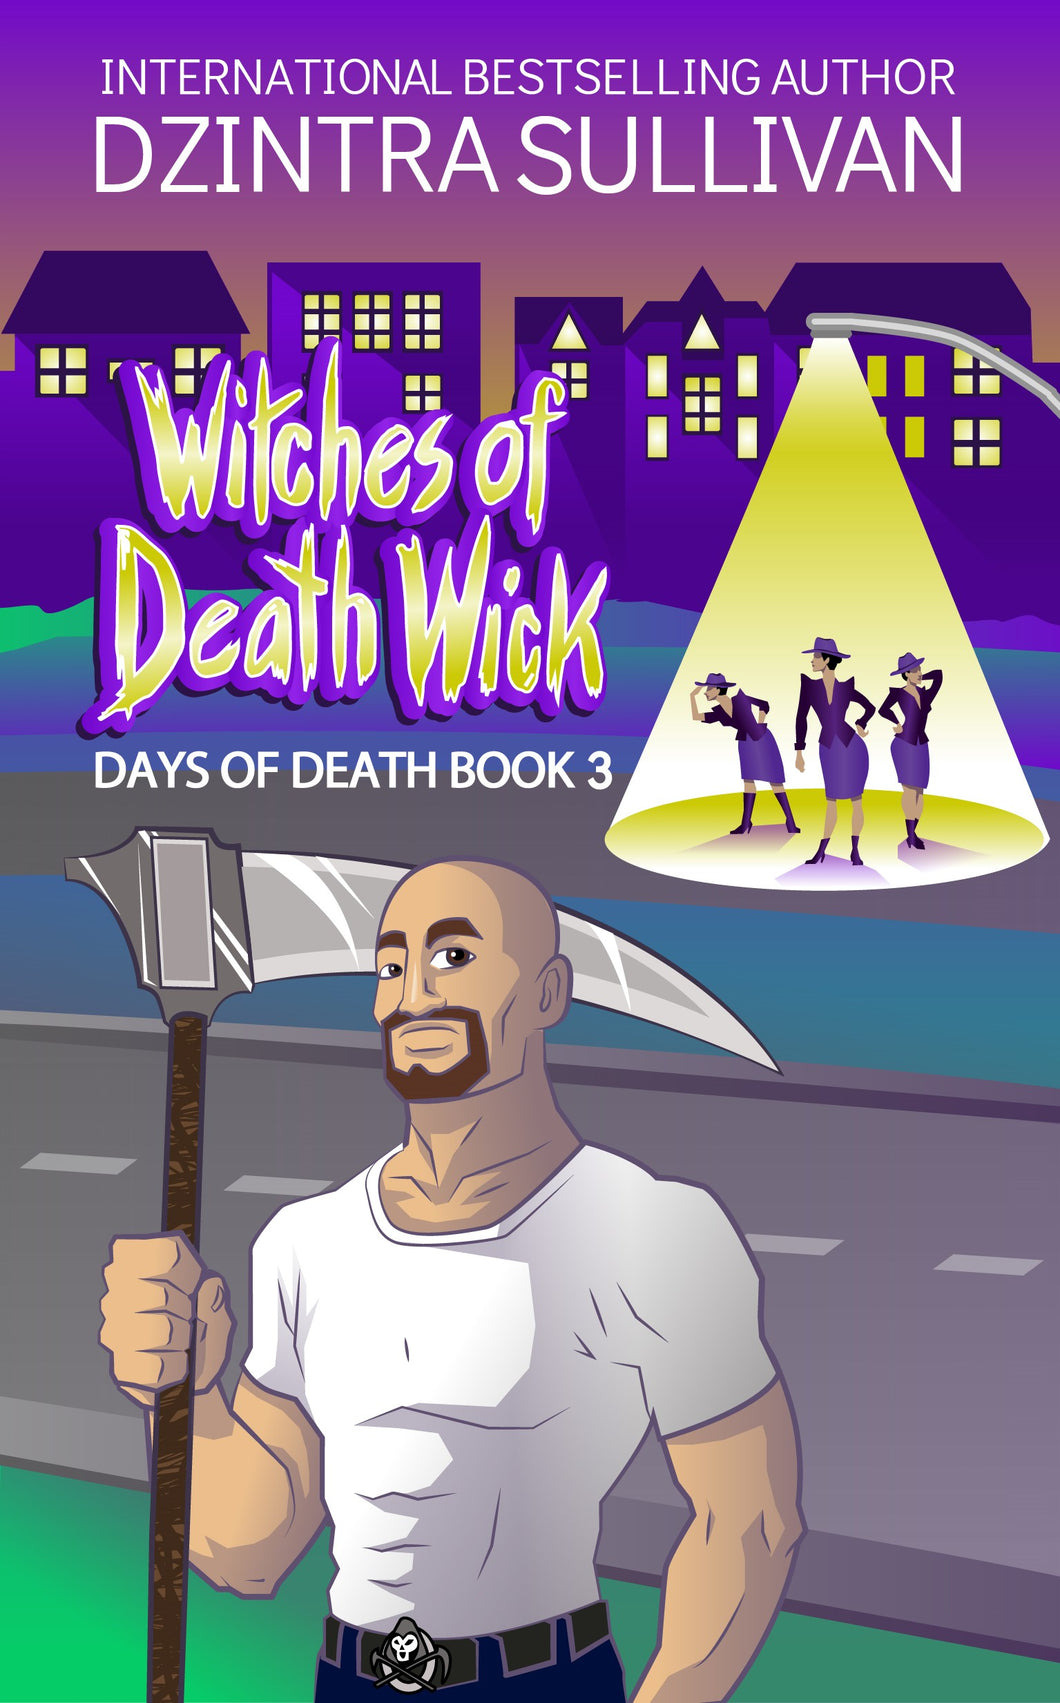 EPUB DOWNLOAD - Witches of Death Wick